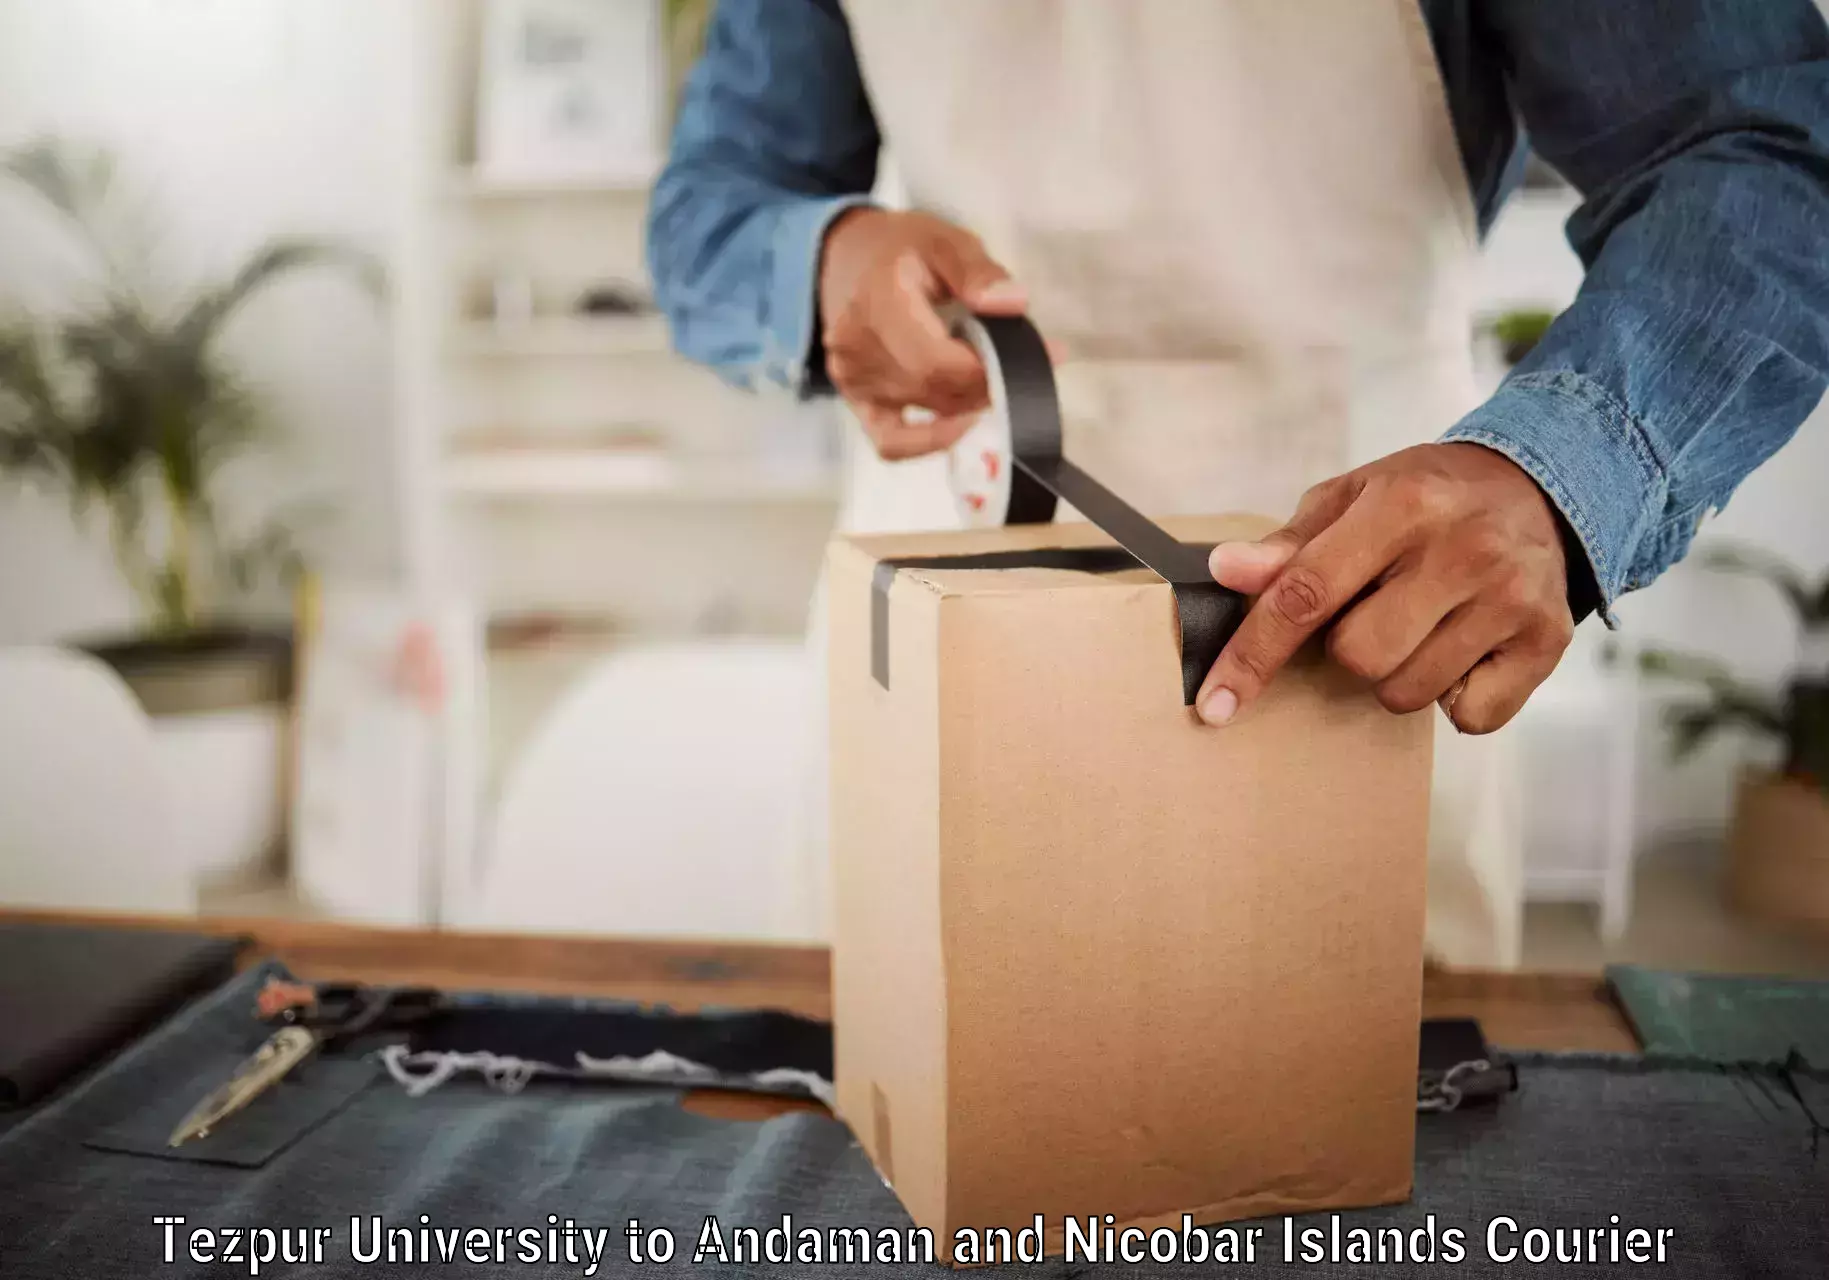 Easy access courier services Tezpur University to North And Middle Andaman